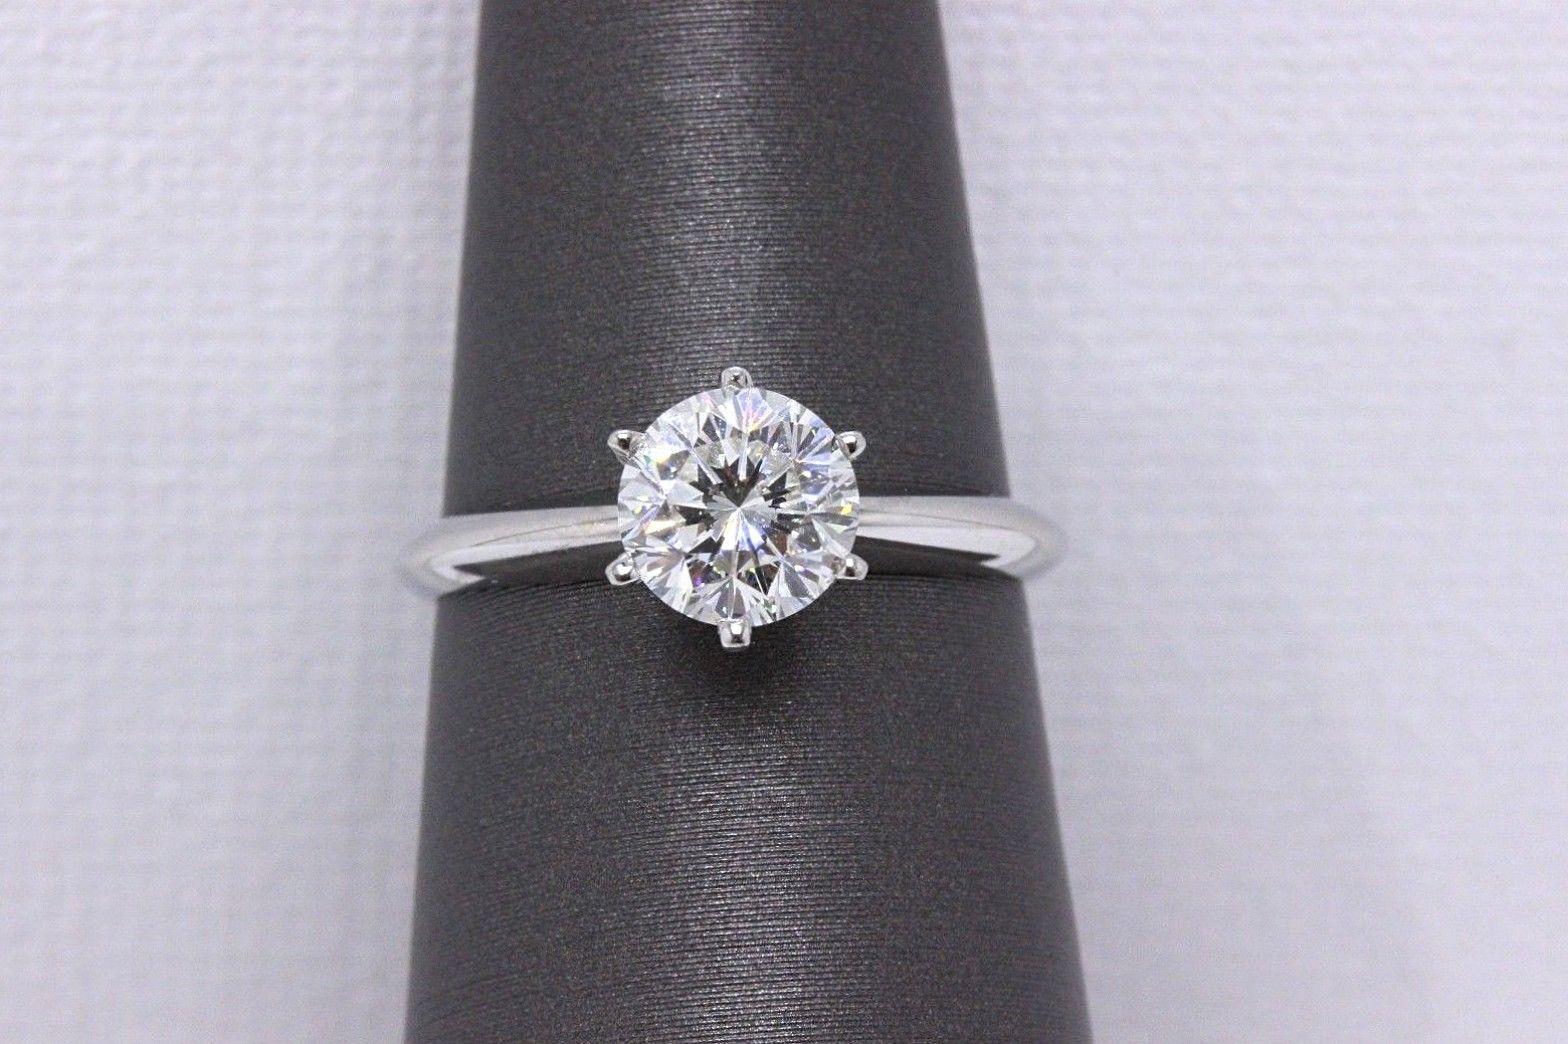 Leo Diamond Solitaire Engagement Ring Round Cut 1.05 CTS H SI1 14K White Gold In Excellent Condition For Sale In San Diego, CA